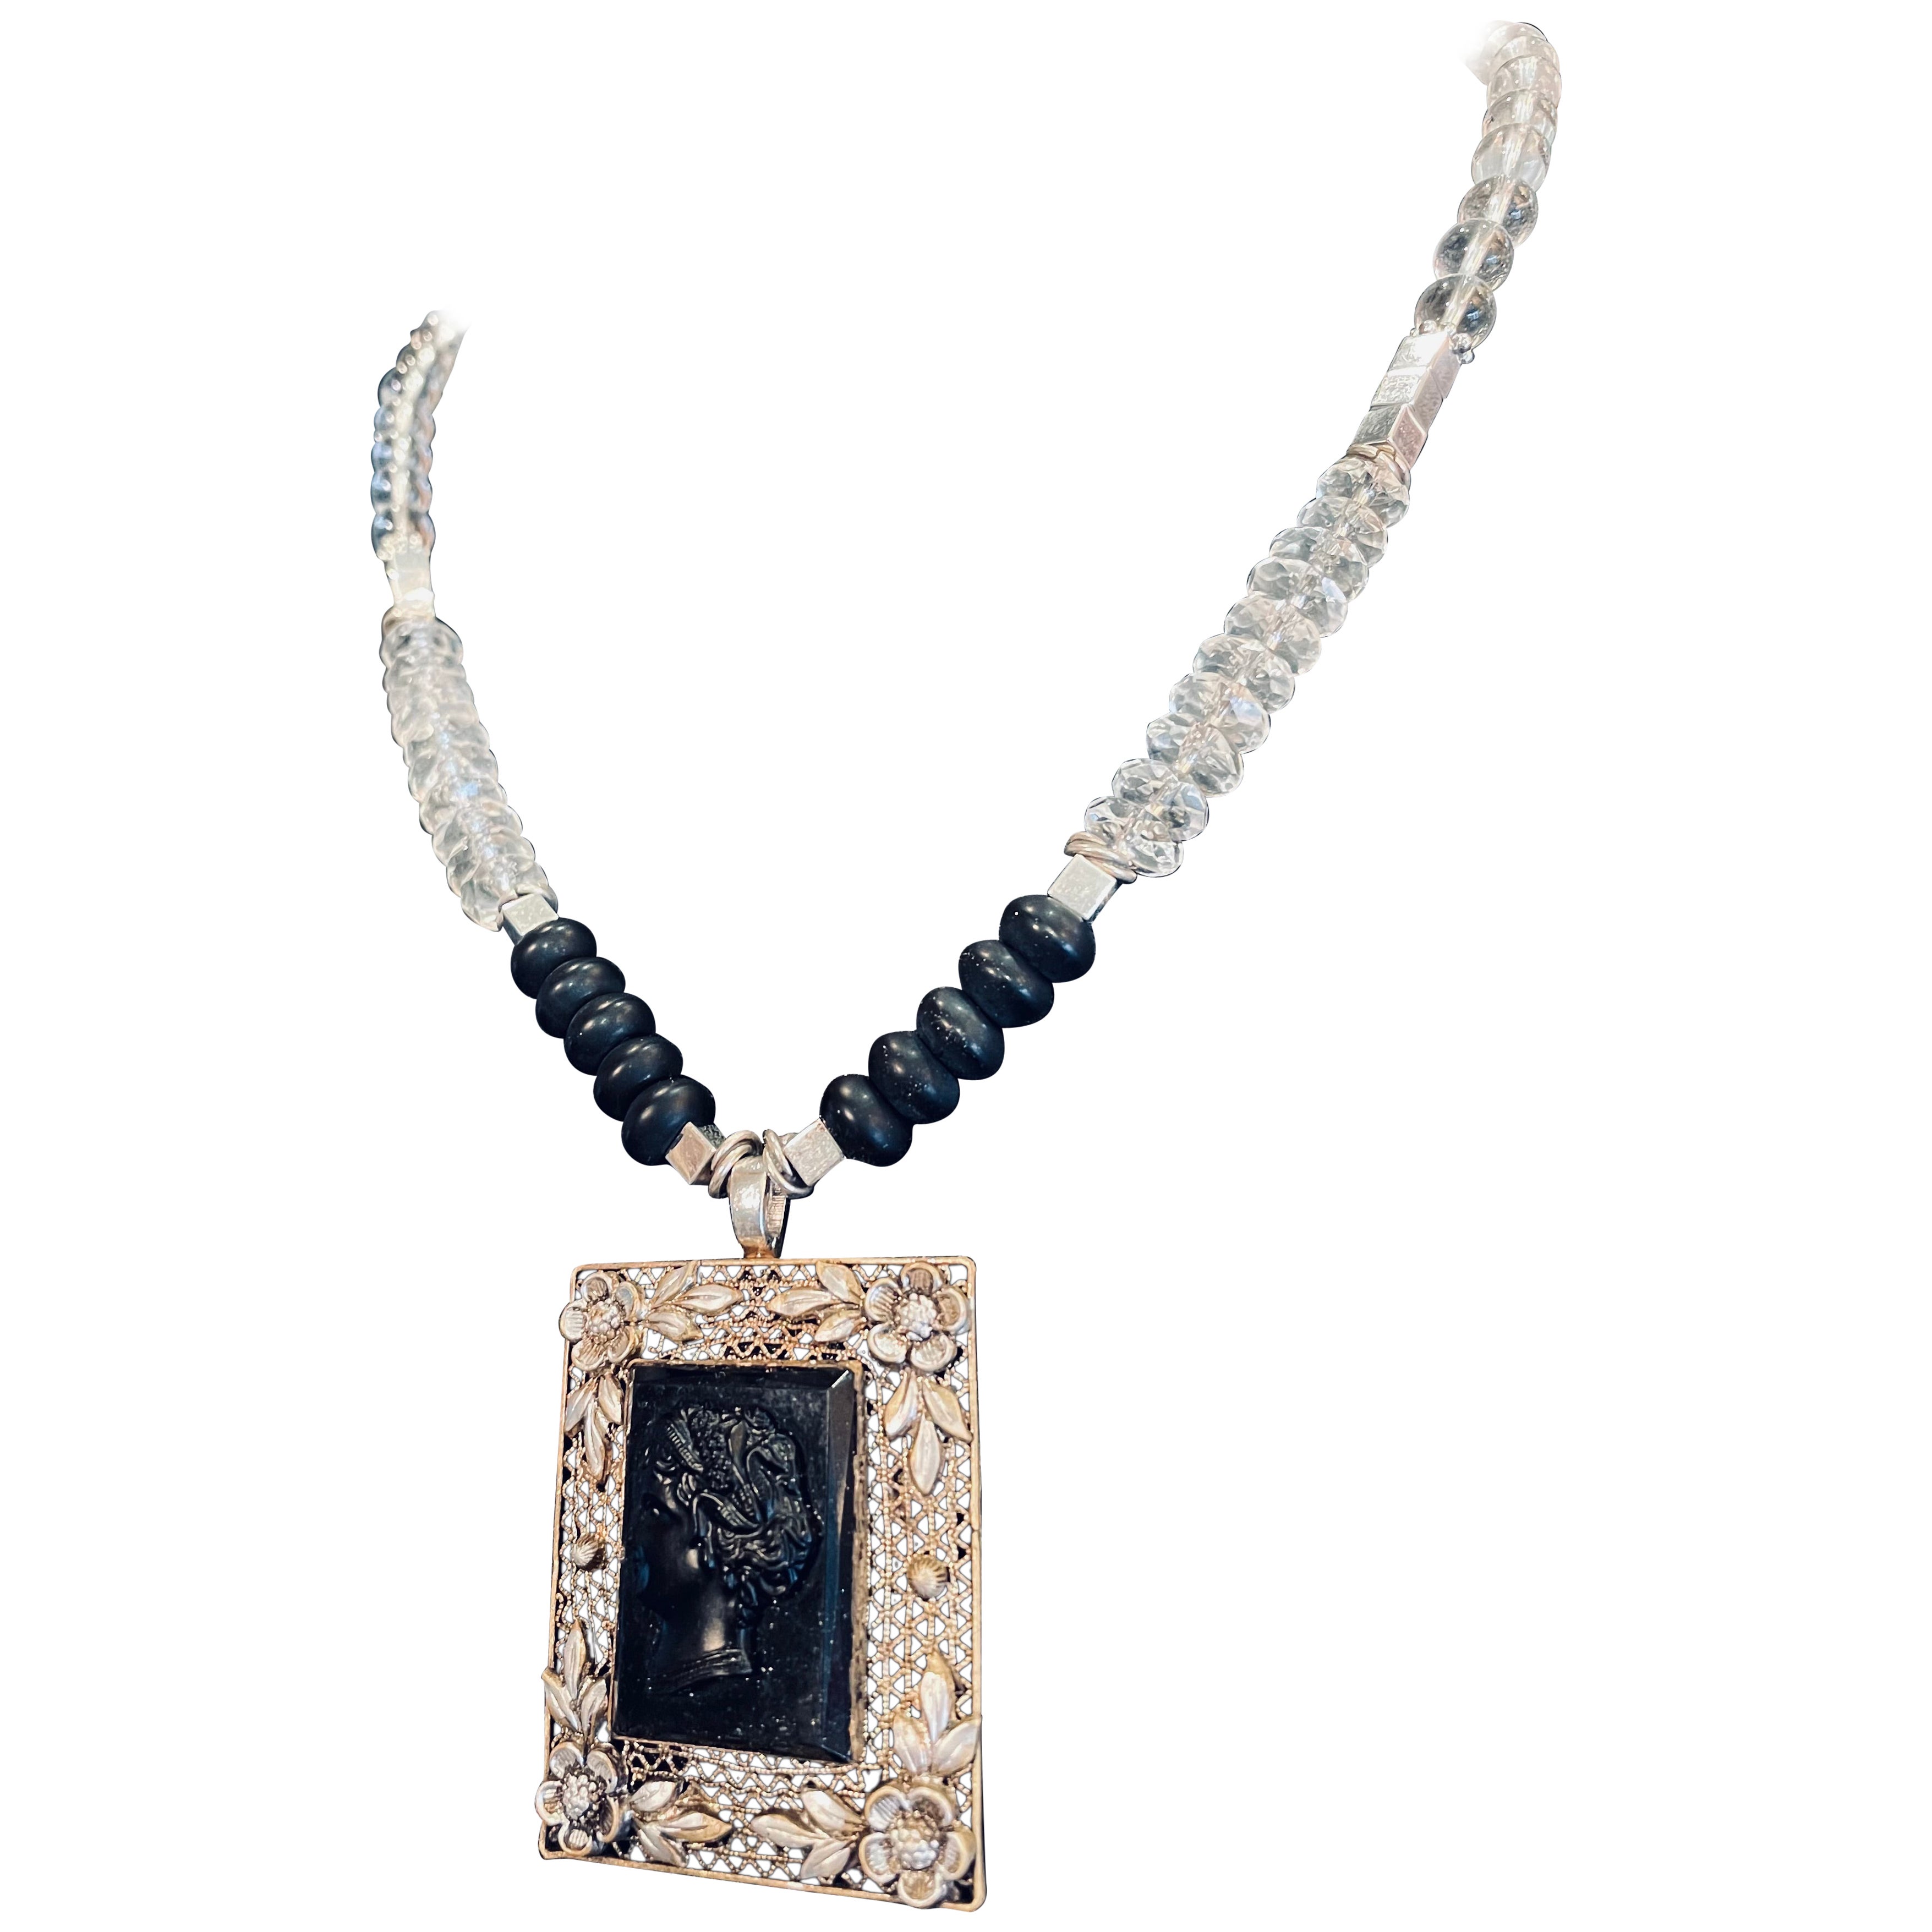 LB offers Victorian Style Czech glass Cameo Sterling Onyx pendant necklace For Sale